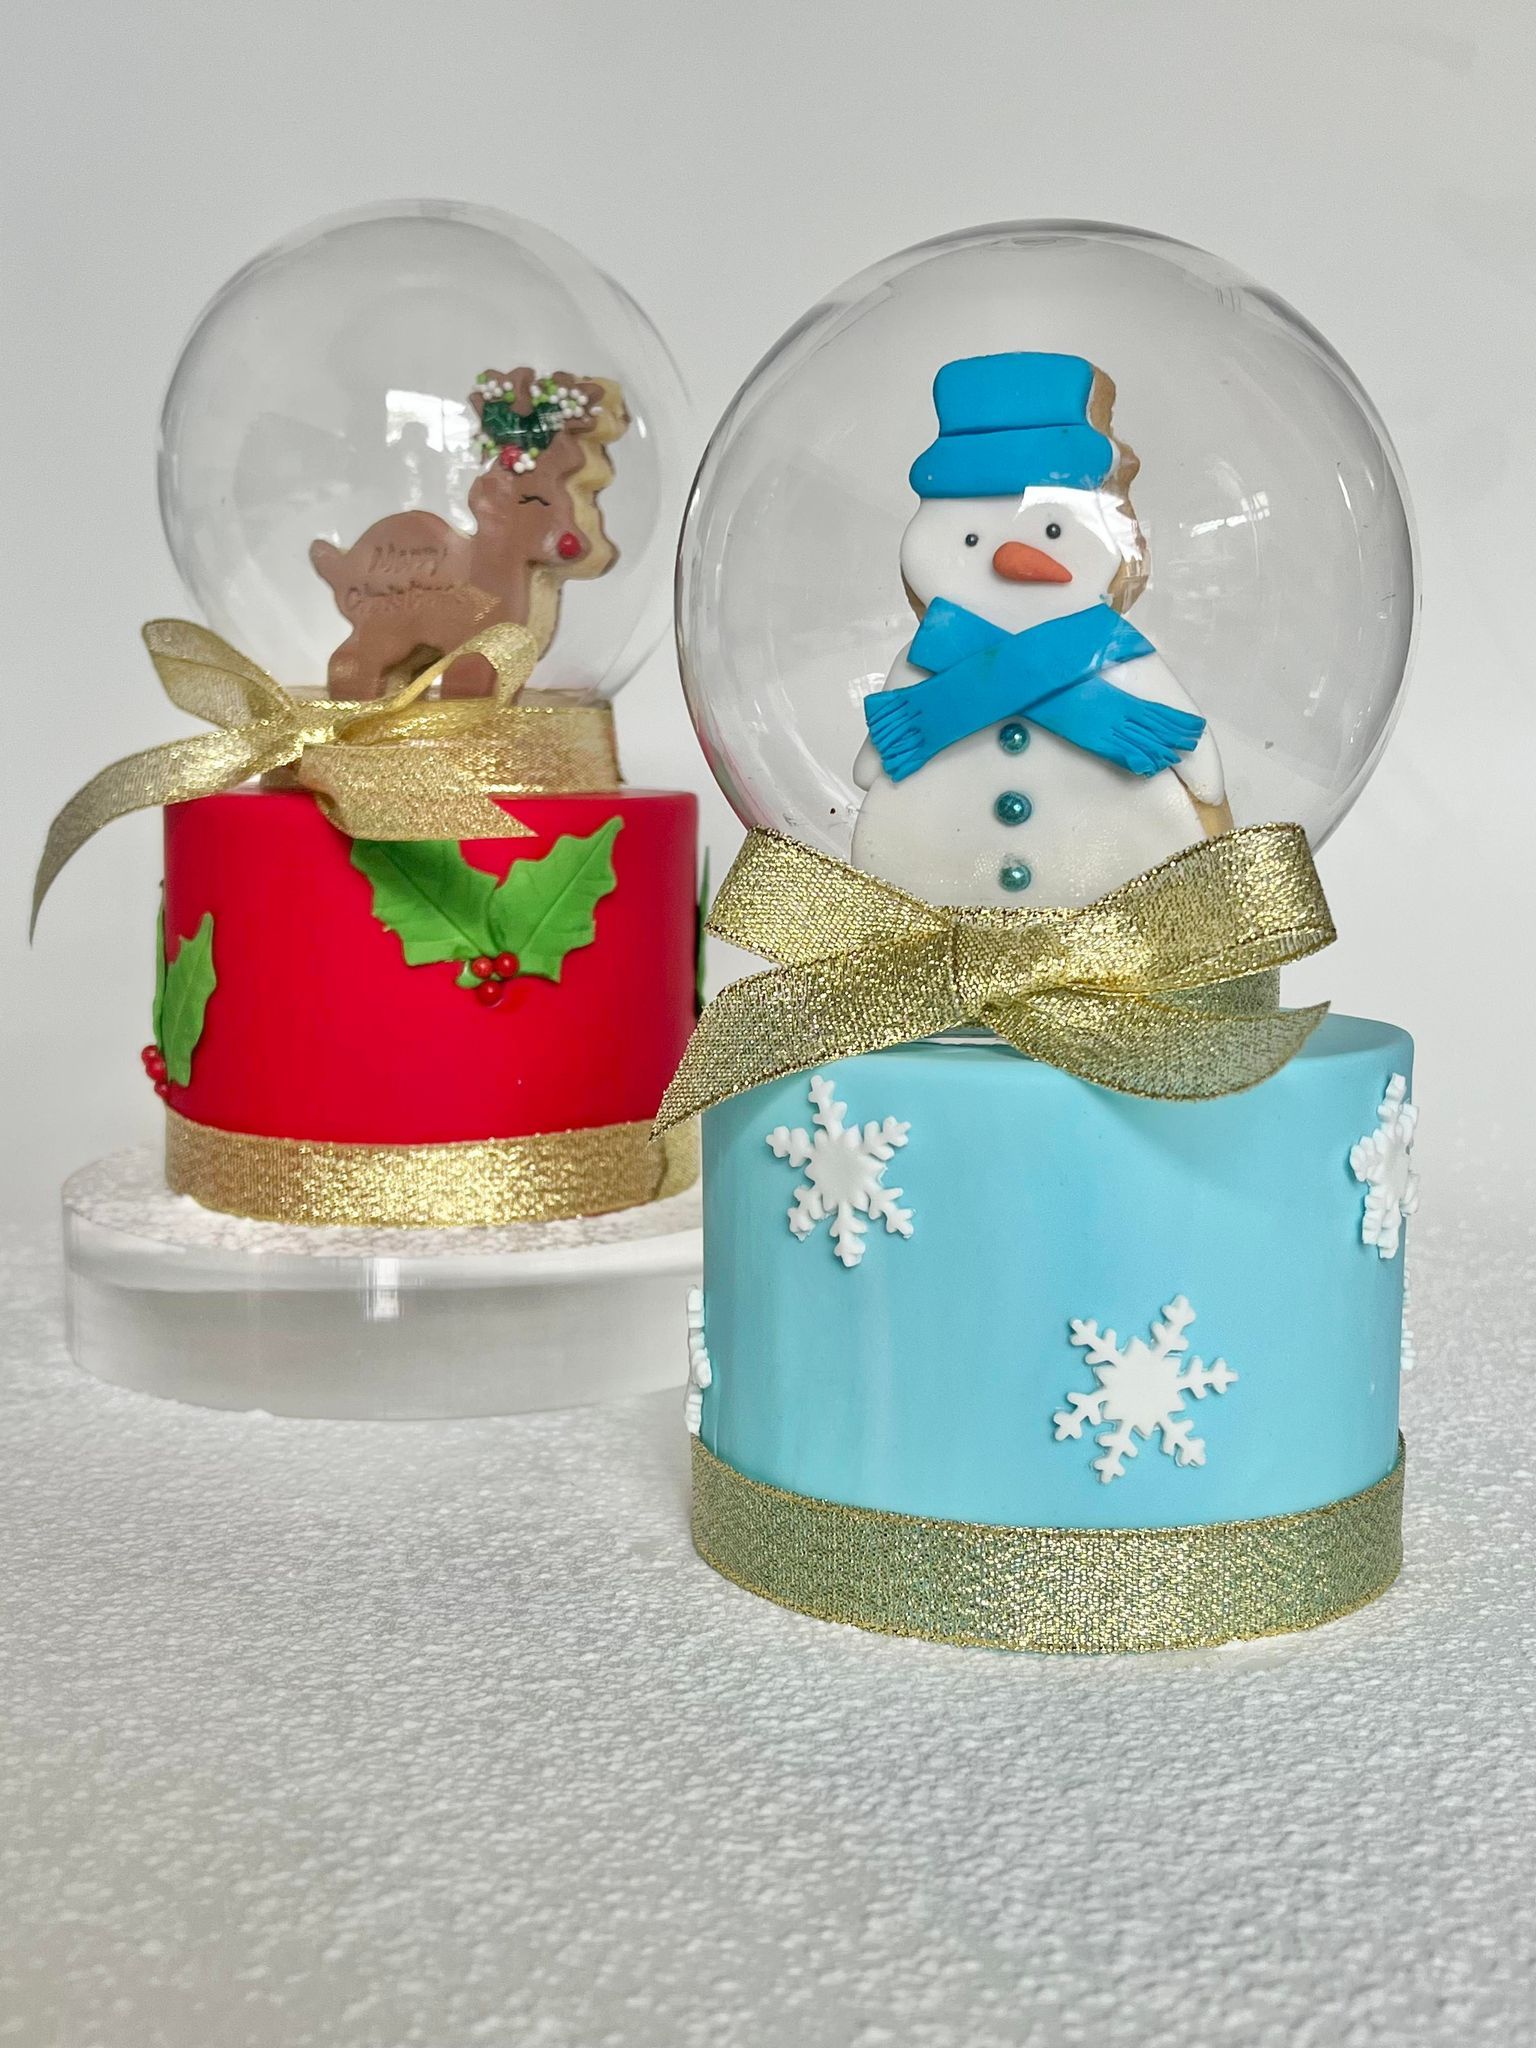 Why Do People Love Snow Globes